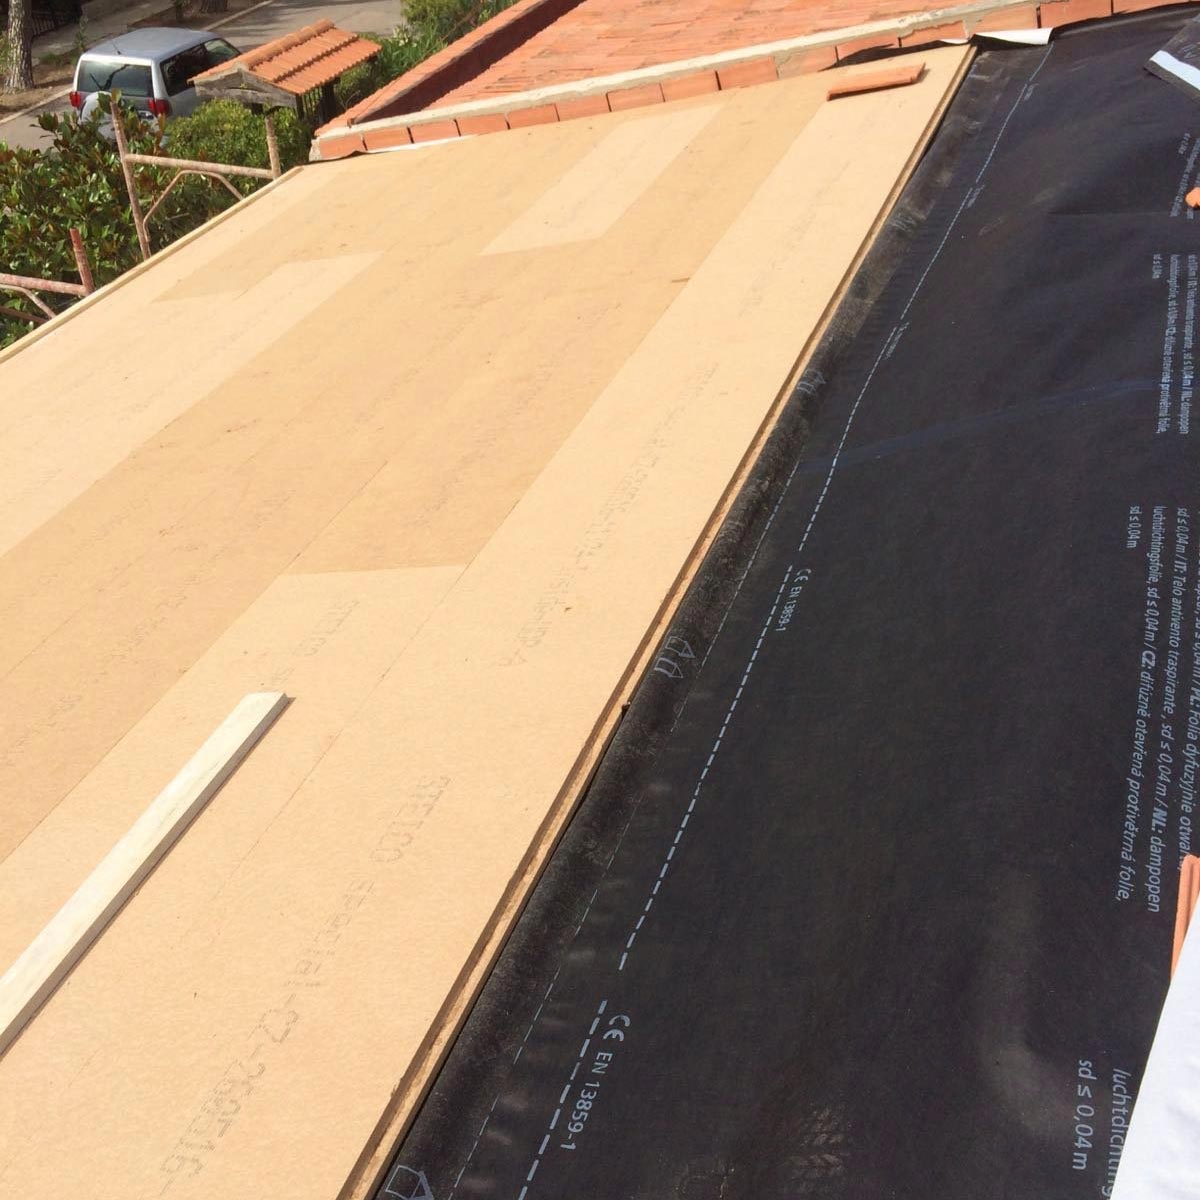 Wood fiber FiberTherm Special pitched roof insulation